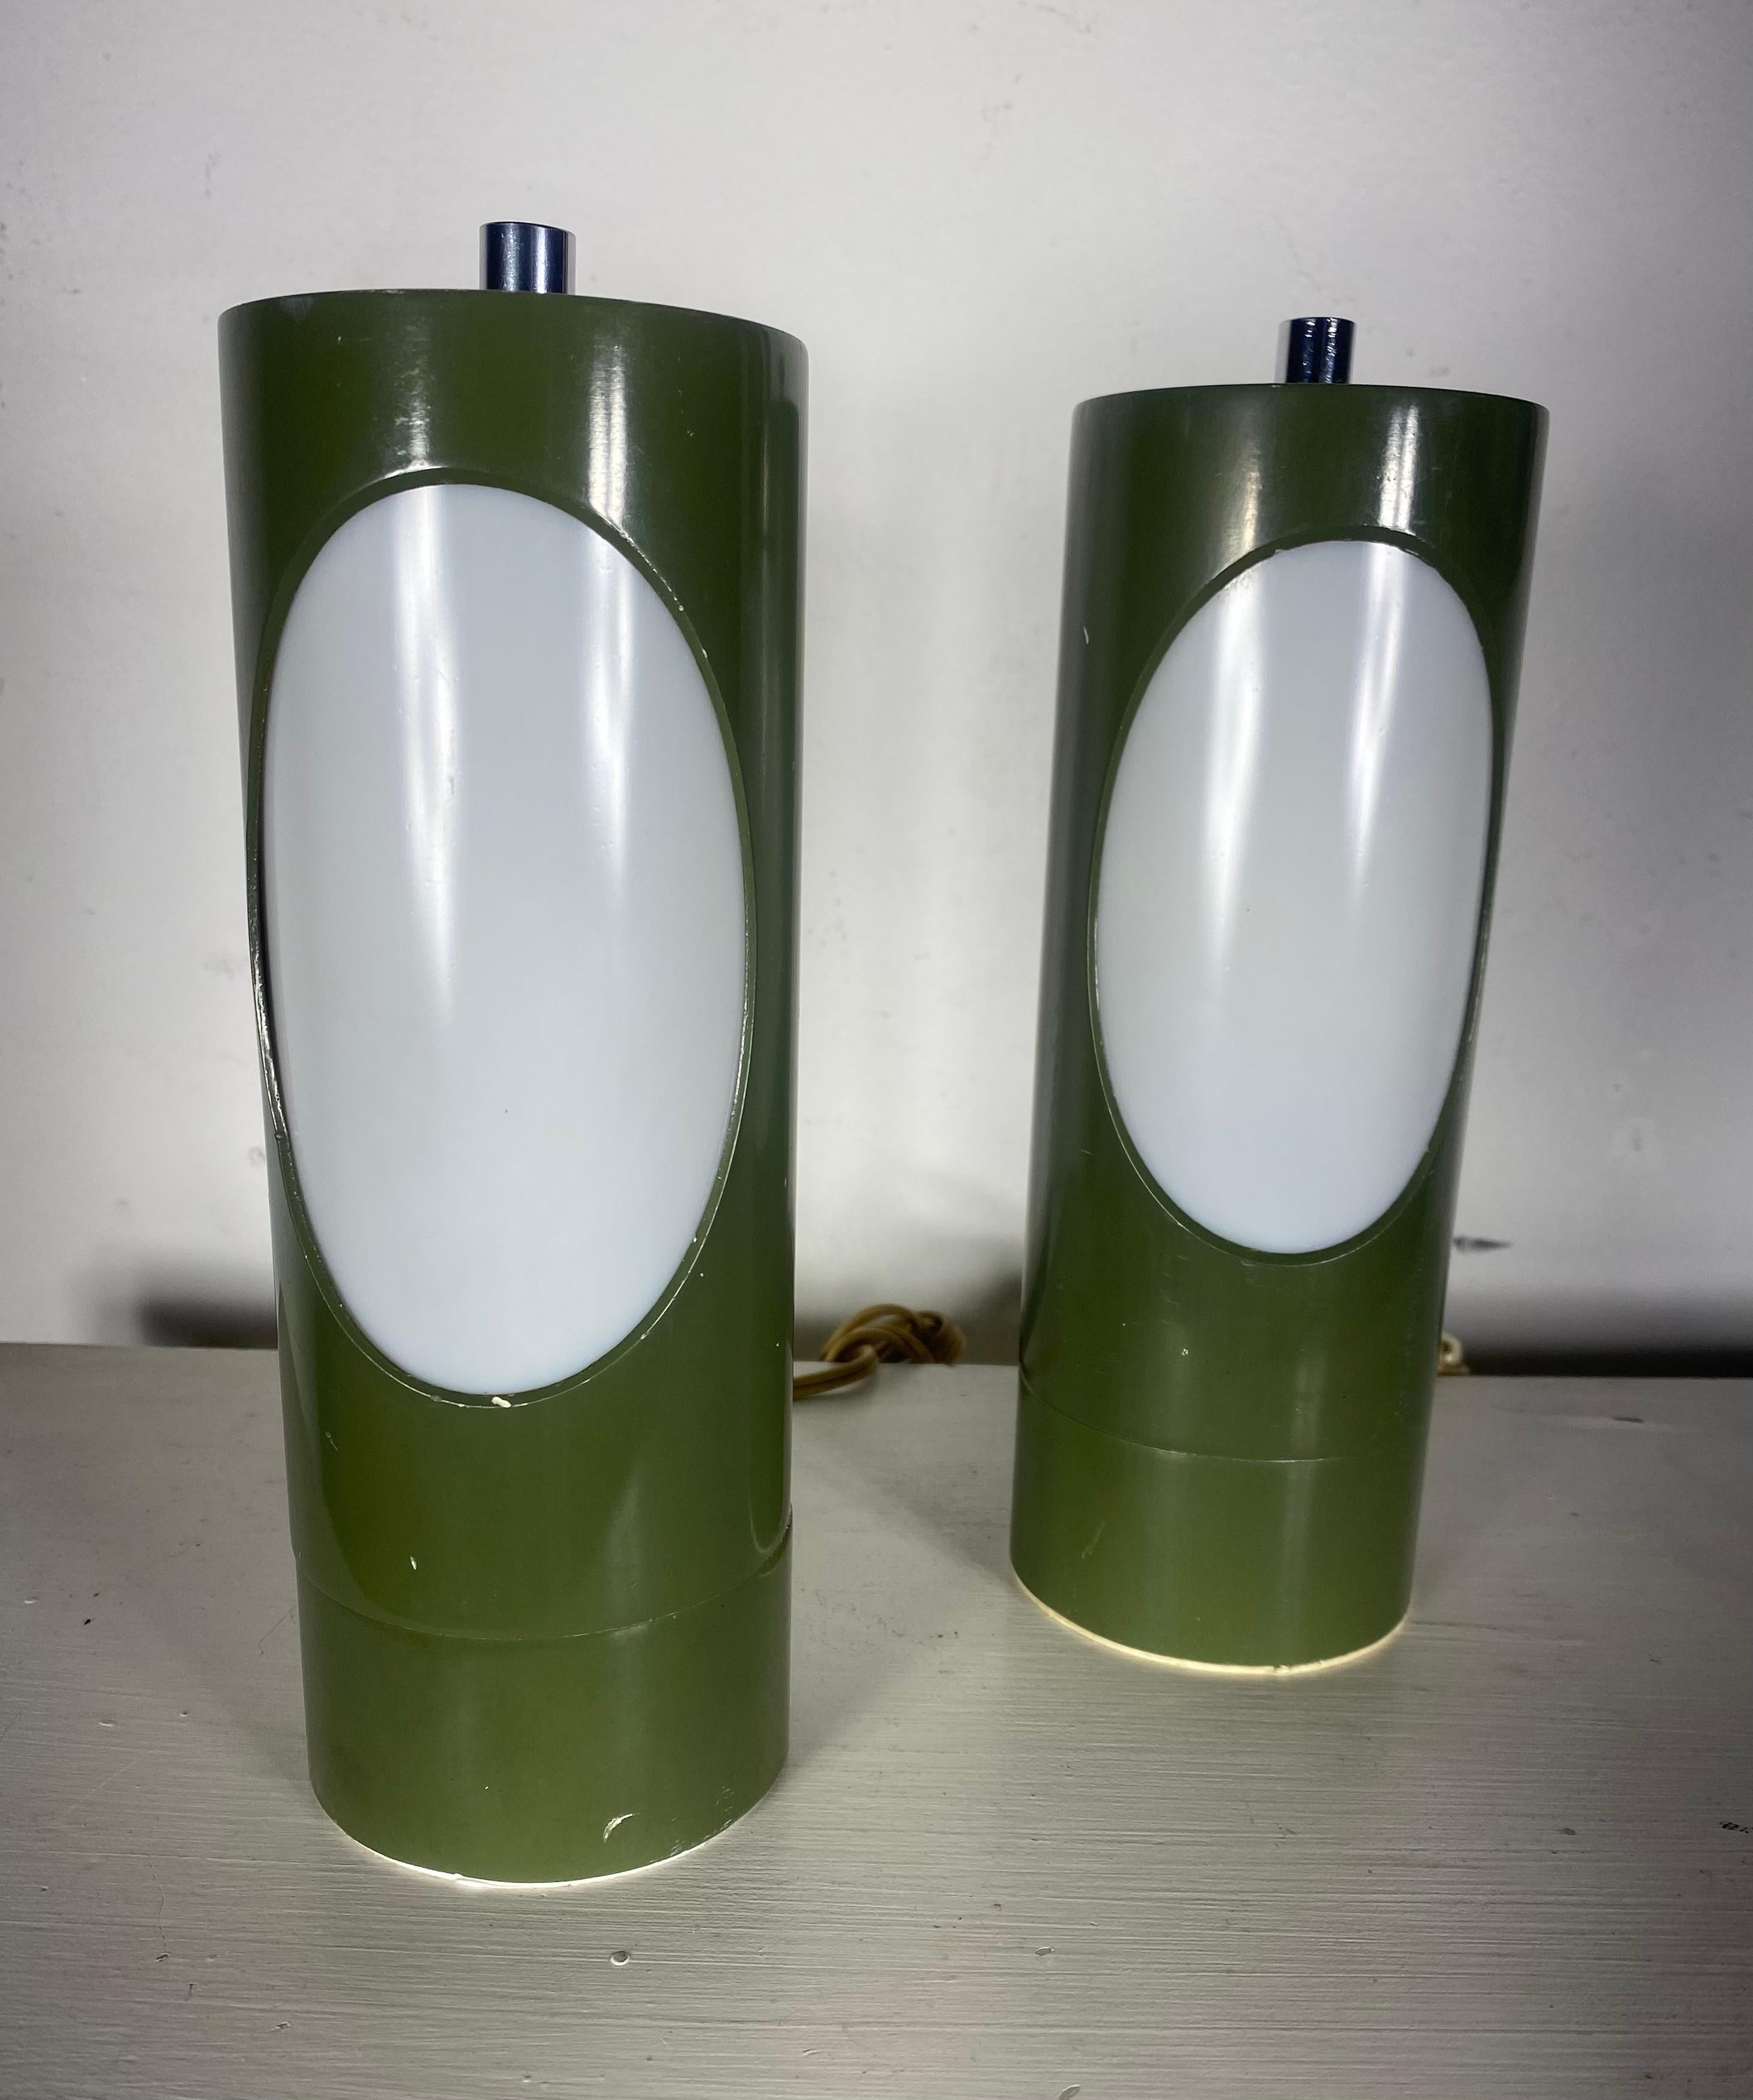 Mid-20th Century Italian Space Age Metal Cylinder Table Lamps by Reggiani, 1960s For Sale